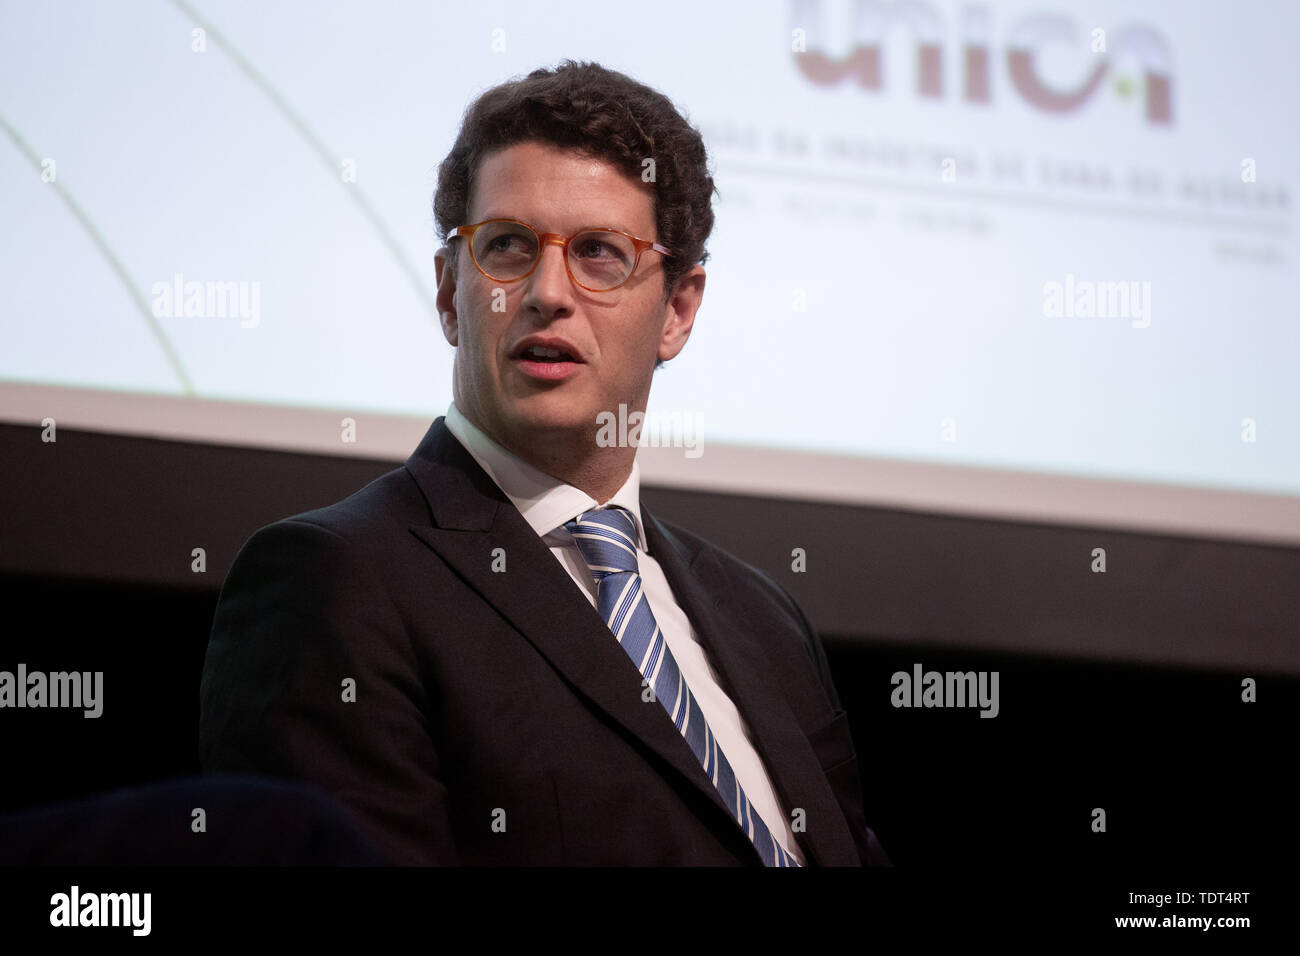 Sao Paulo, Sao Paulo, Brazil. 17th June, 2019. RICARDO SALLES, Minister for the Environment, attends the Ethanol Summit 2019, organized by the Sugar Cane Industry Union, at the headquarters of the Federation of Commerce, in Sao Paulo. The meeting brings together entrepreneurs, researchers and companies focused on renewable energies, especially ethanol and sugar cane derivatives. Credit: Paulo Lopes/ZUMA Wire/Alamy Live News Stock Photo